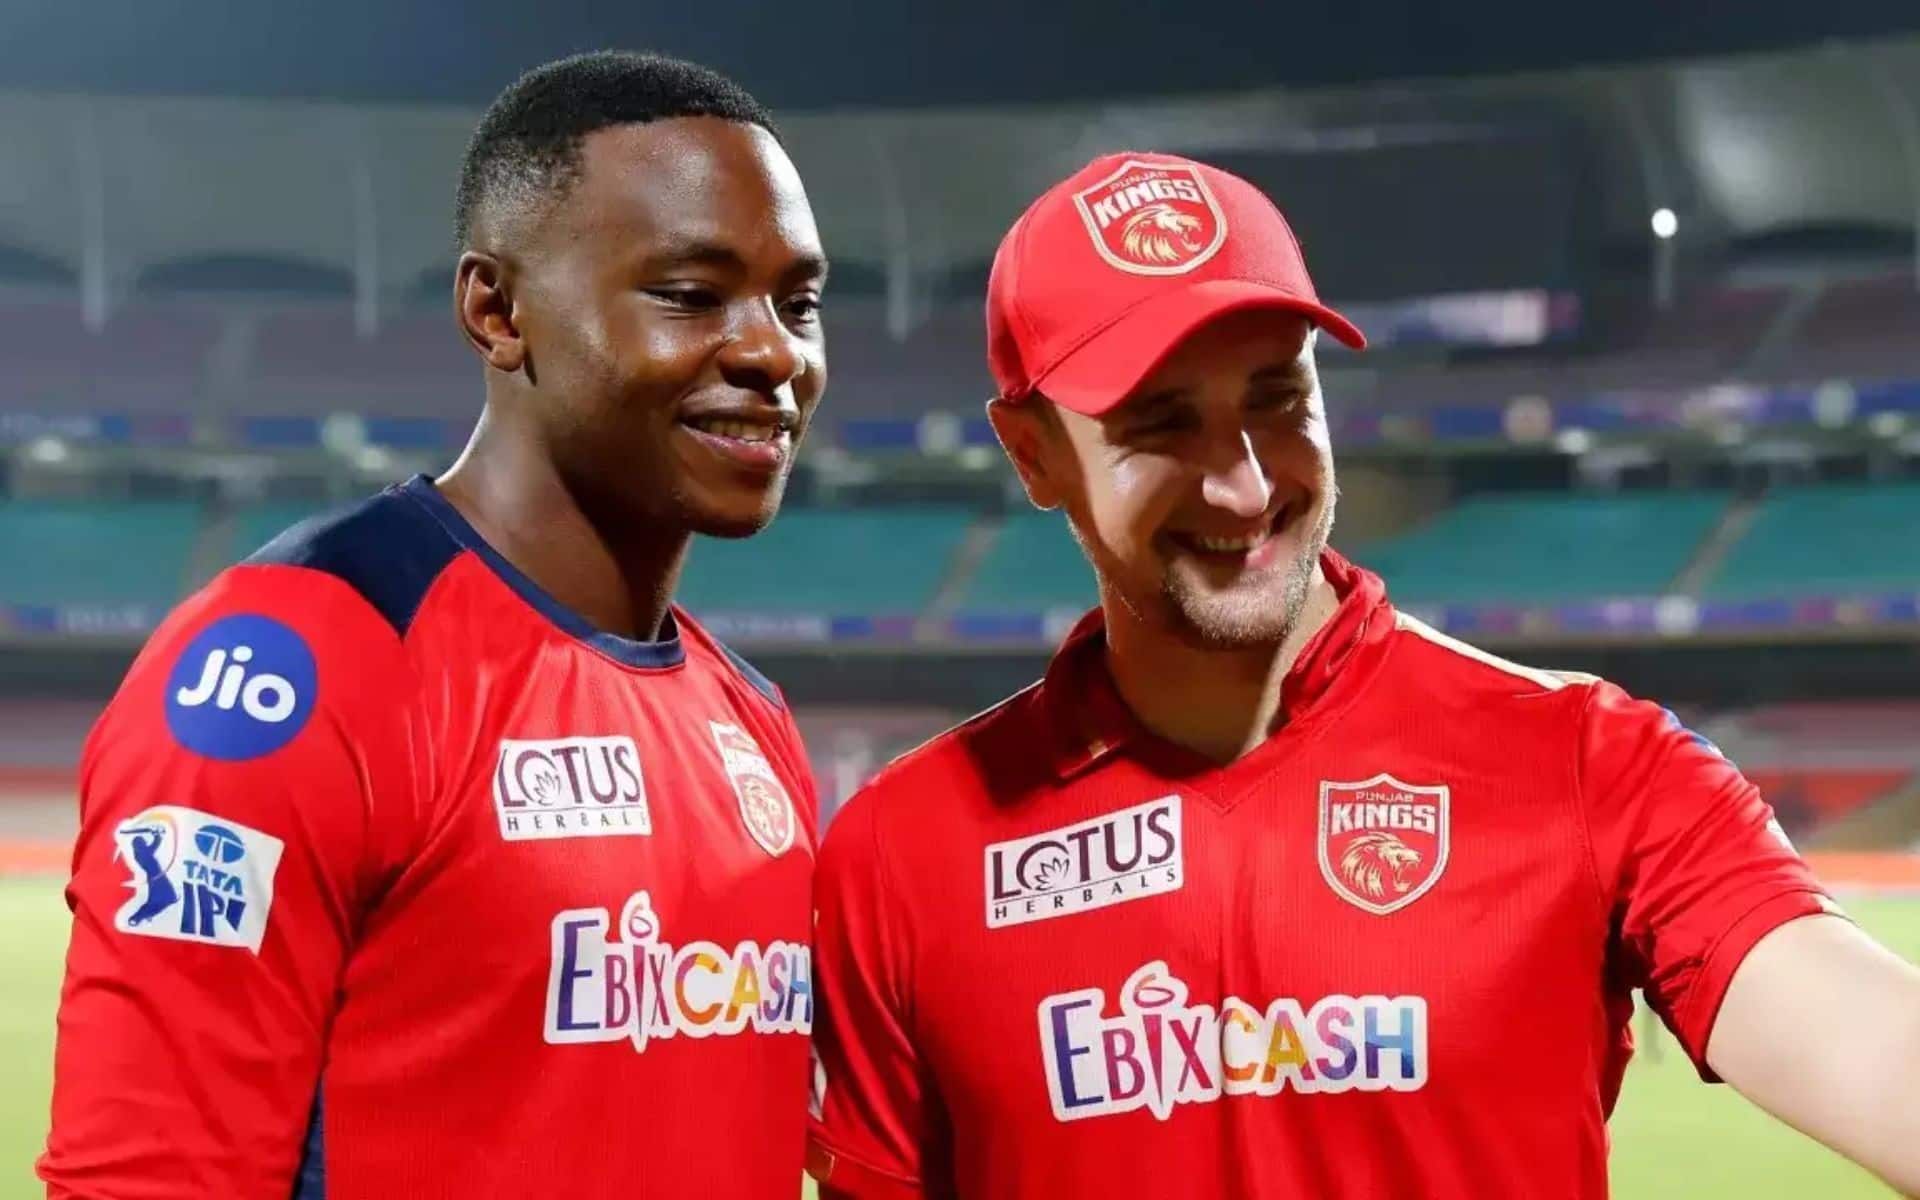 Rabada and Livingstone are ruled out of the remaining two games (x.com)